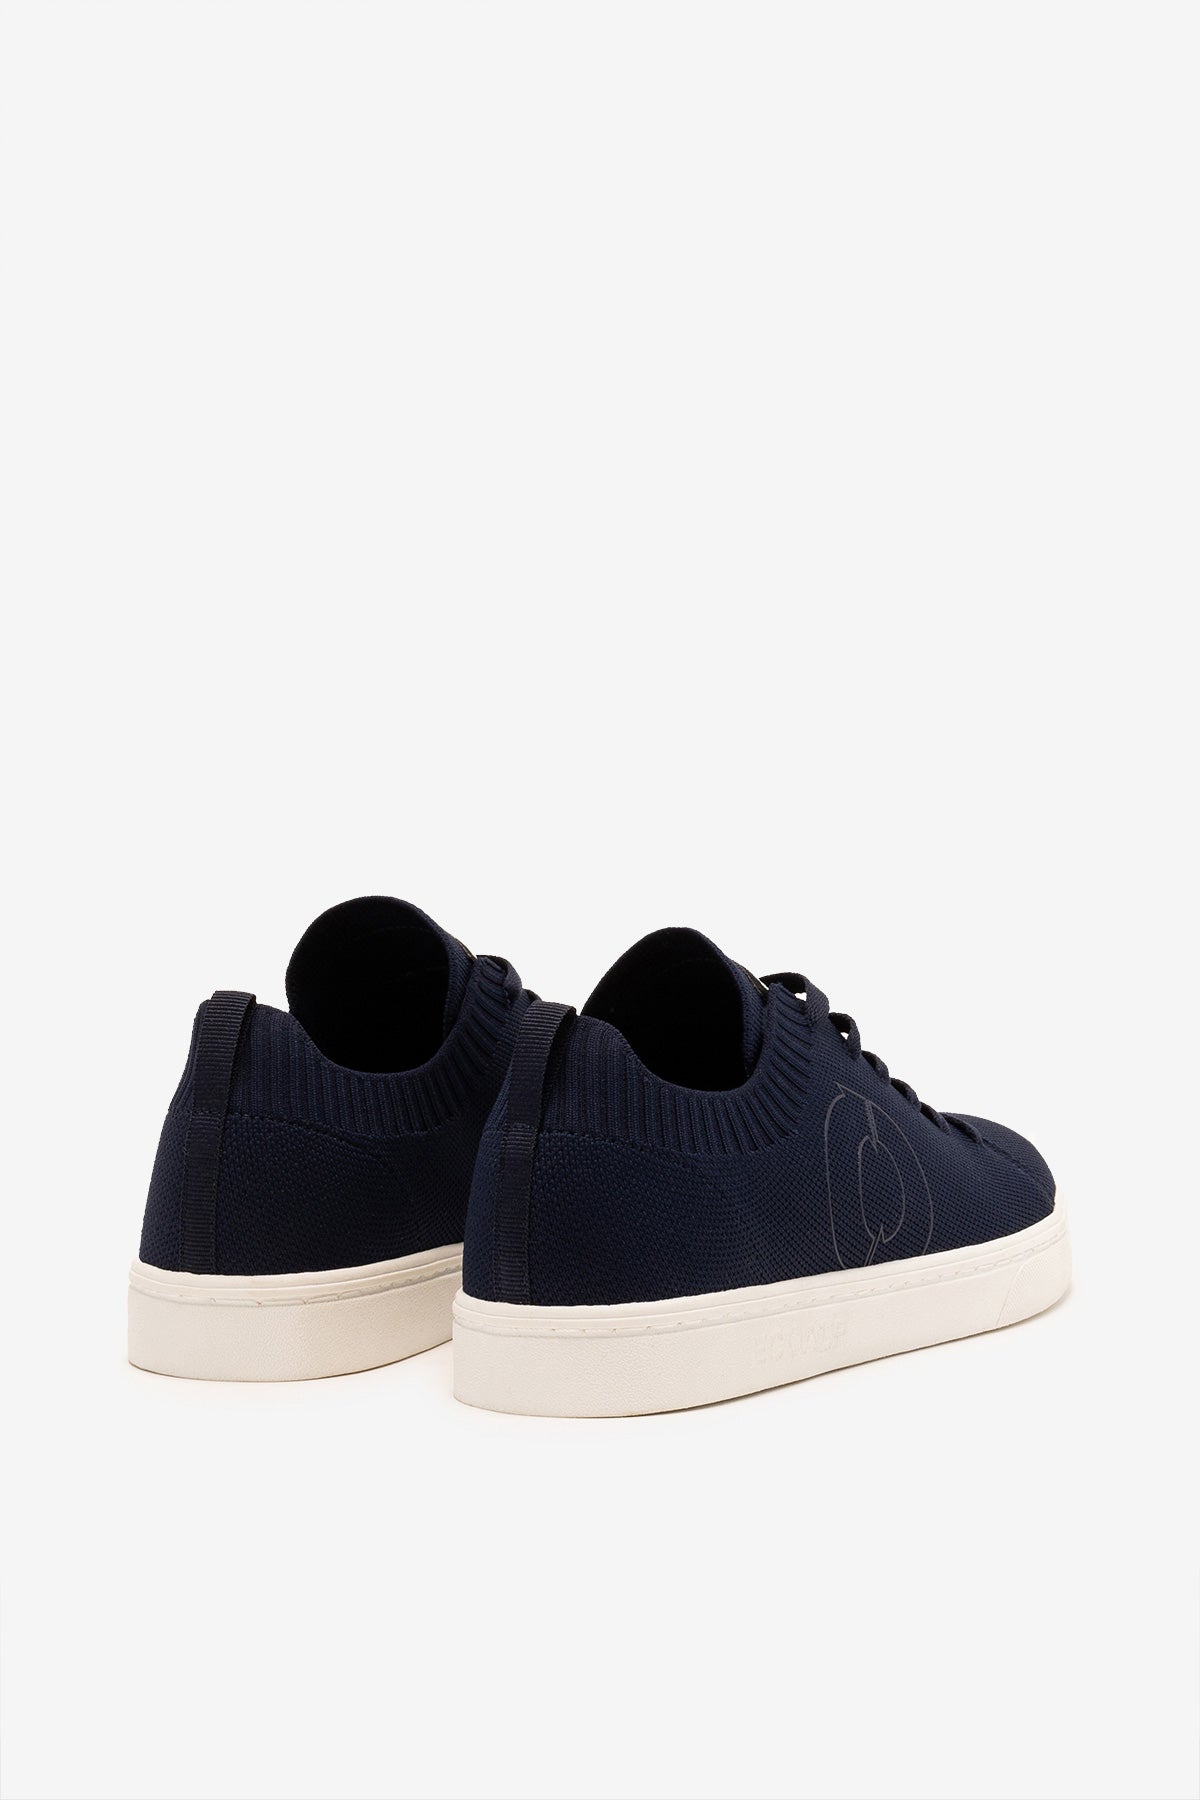 NAVY BLUE JERSEY TRAINERS